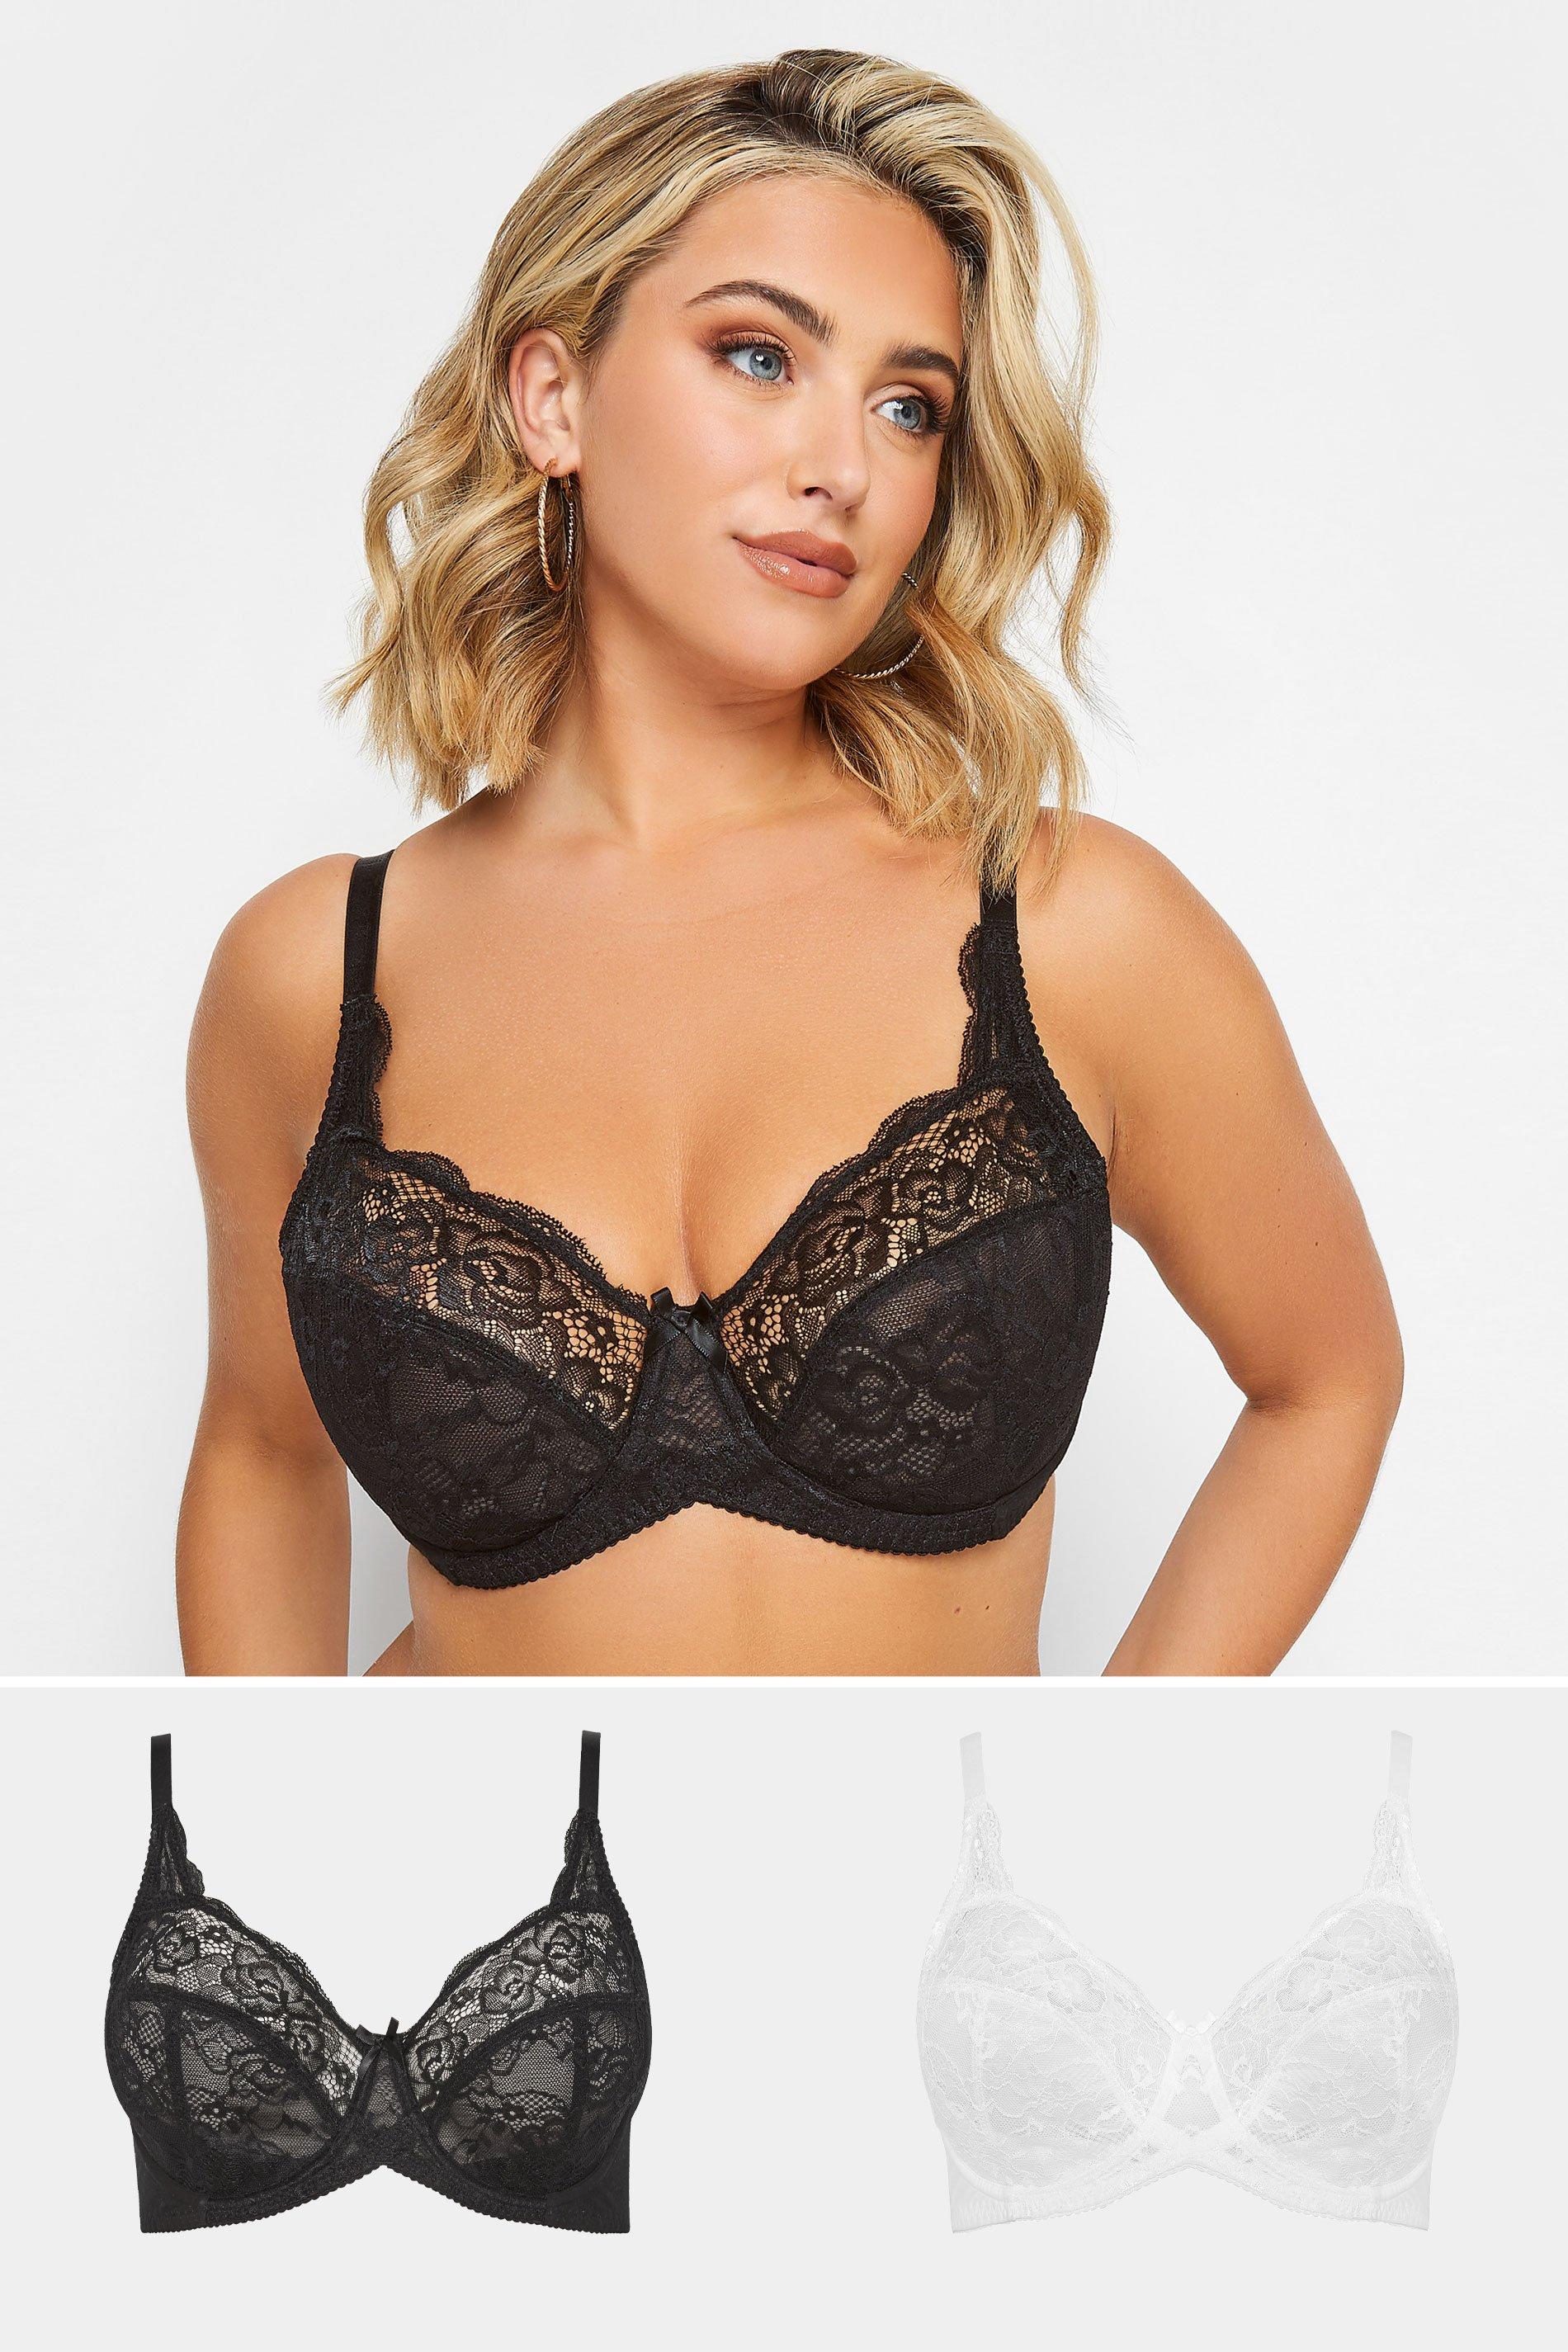 Yours Women's 2 Pack Lace Wired Bras Black 44C - Shopping.com